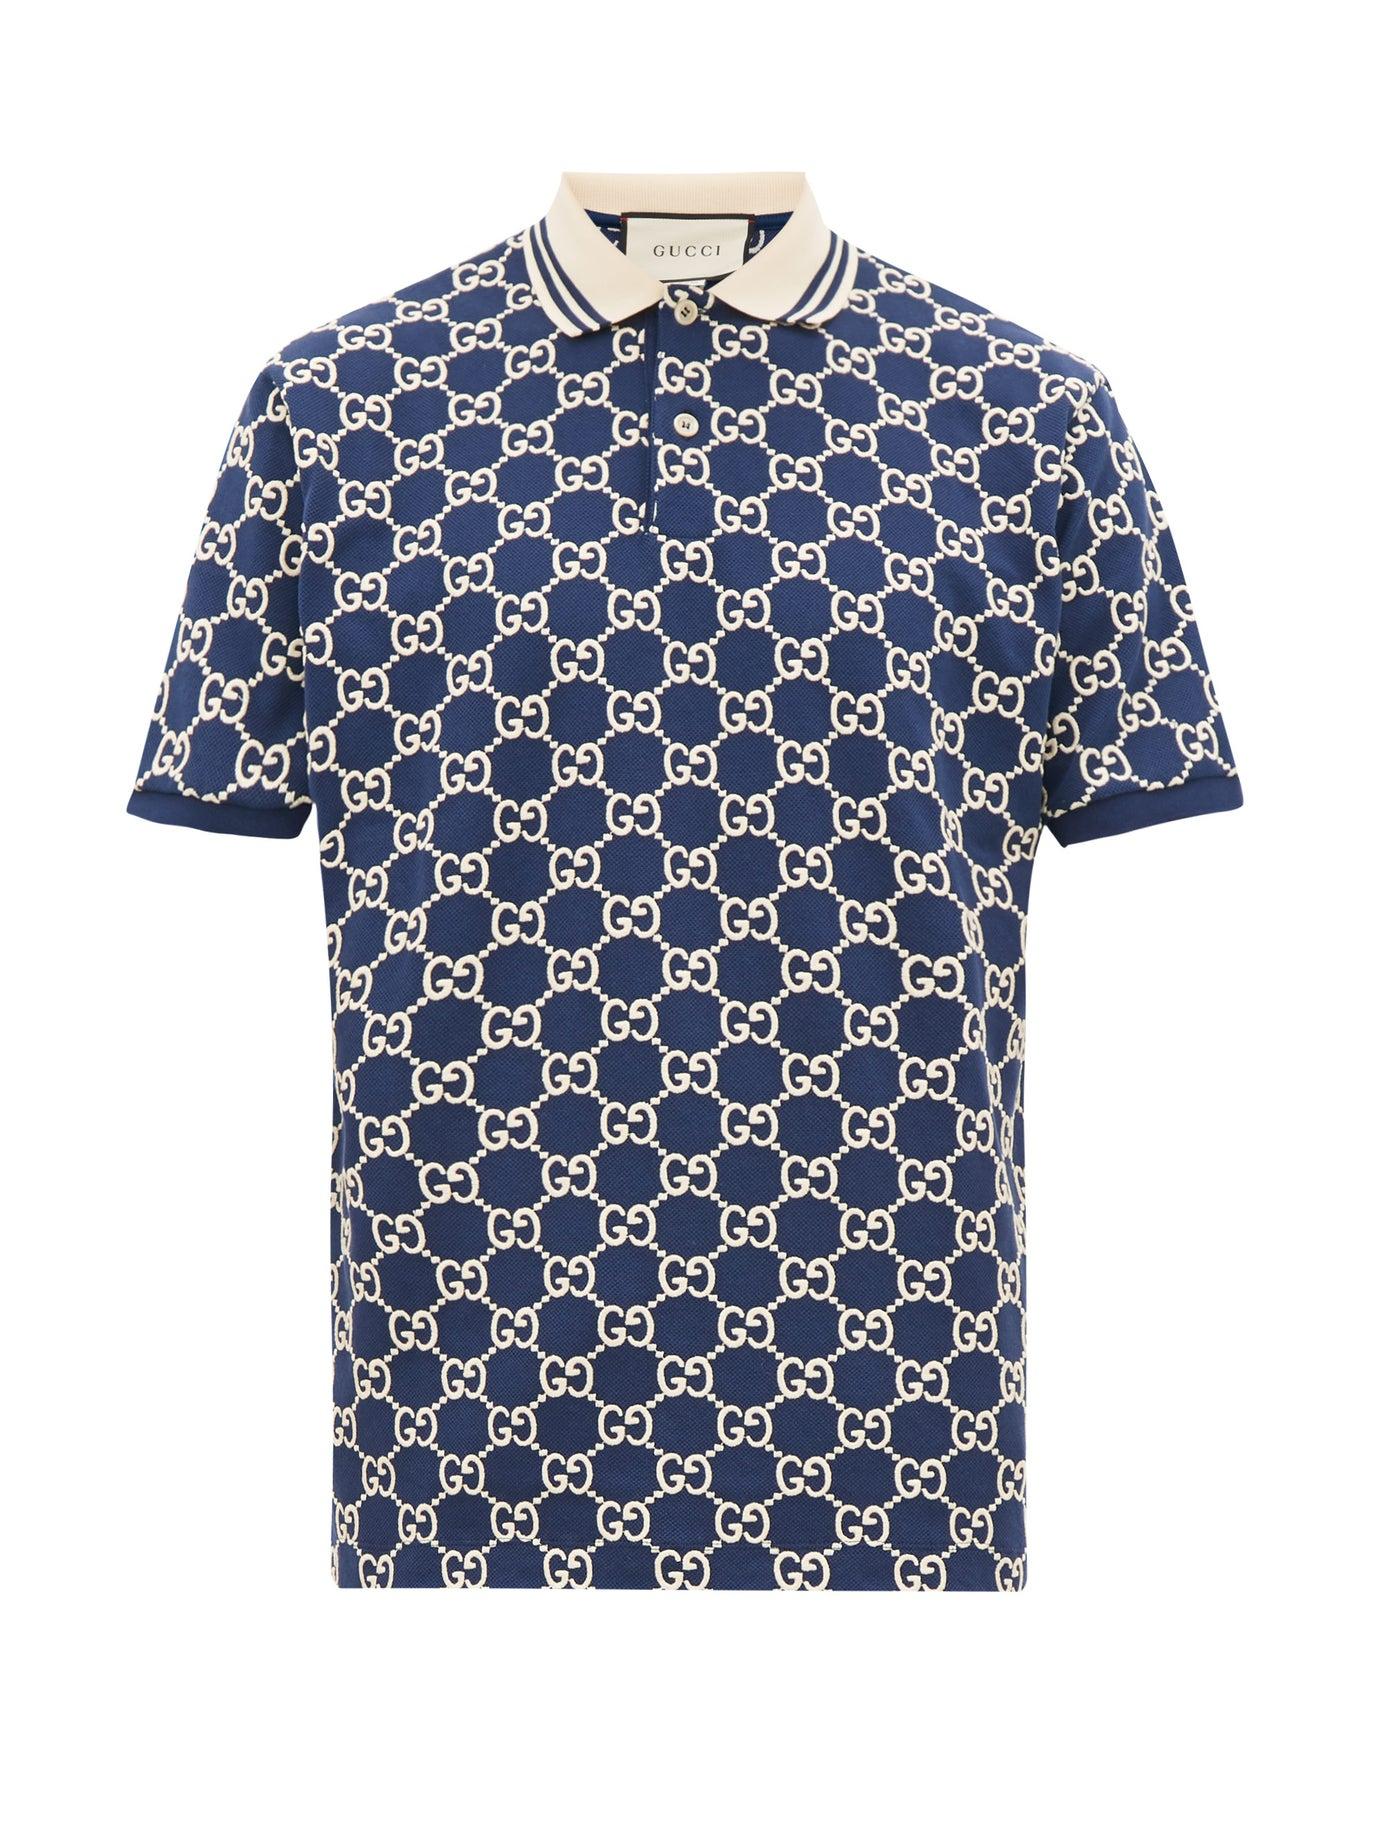 Gucci Cotton Gg Polo Shirt in Navy Blue (Blue) for Men - Save 63% | Lyst